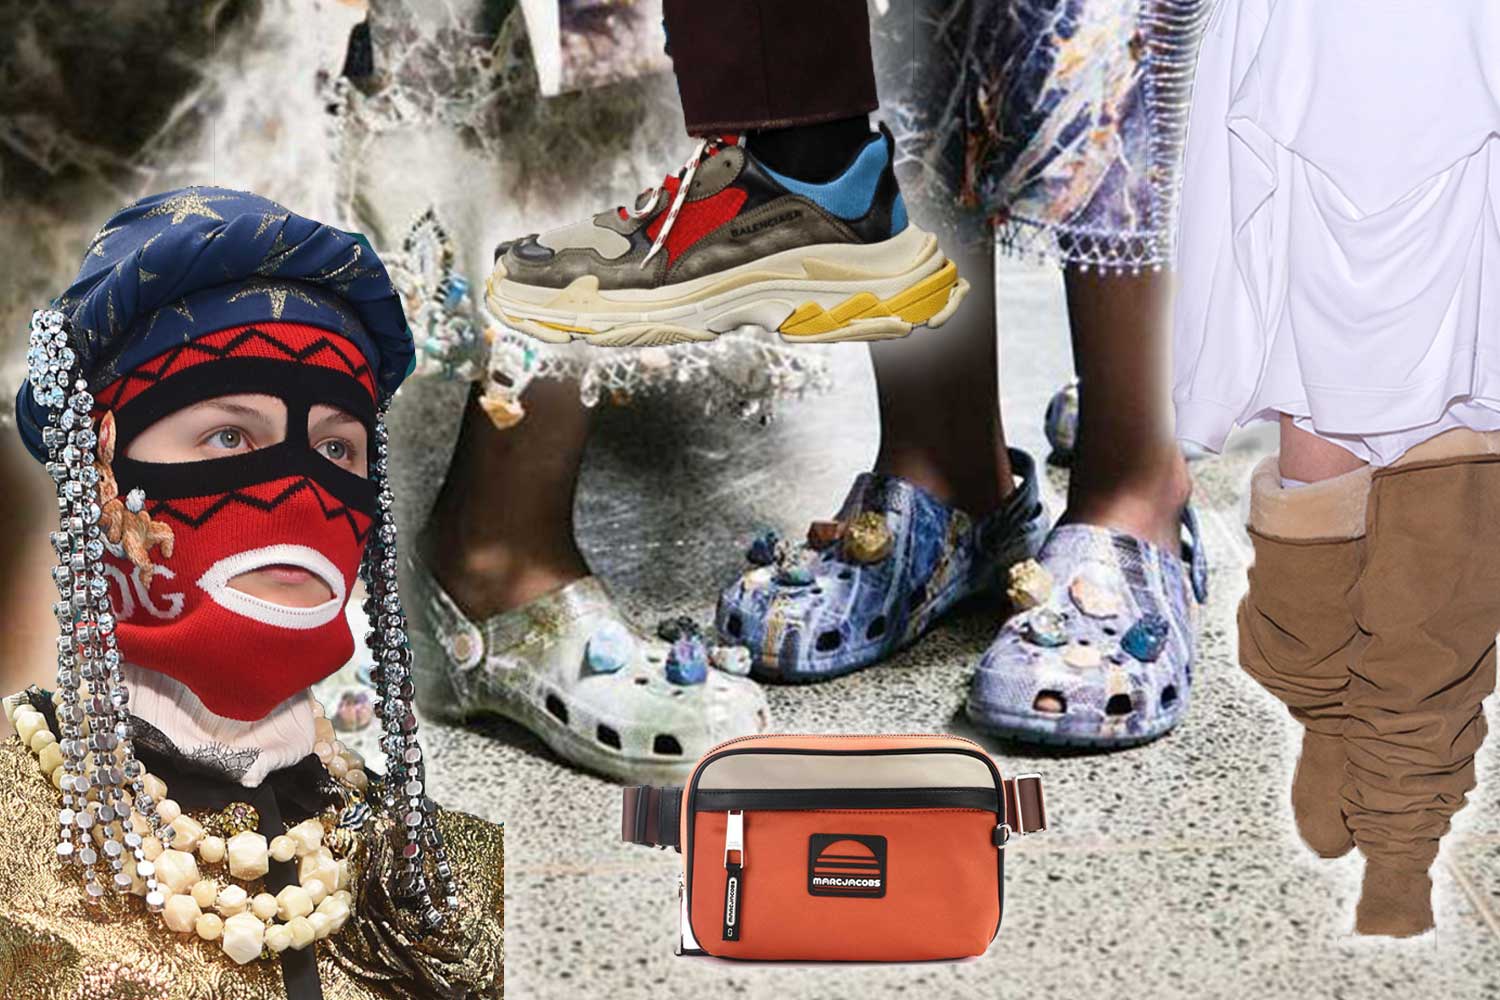 What's trending: Ugly sneakers (could they be the next Uggs?)